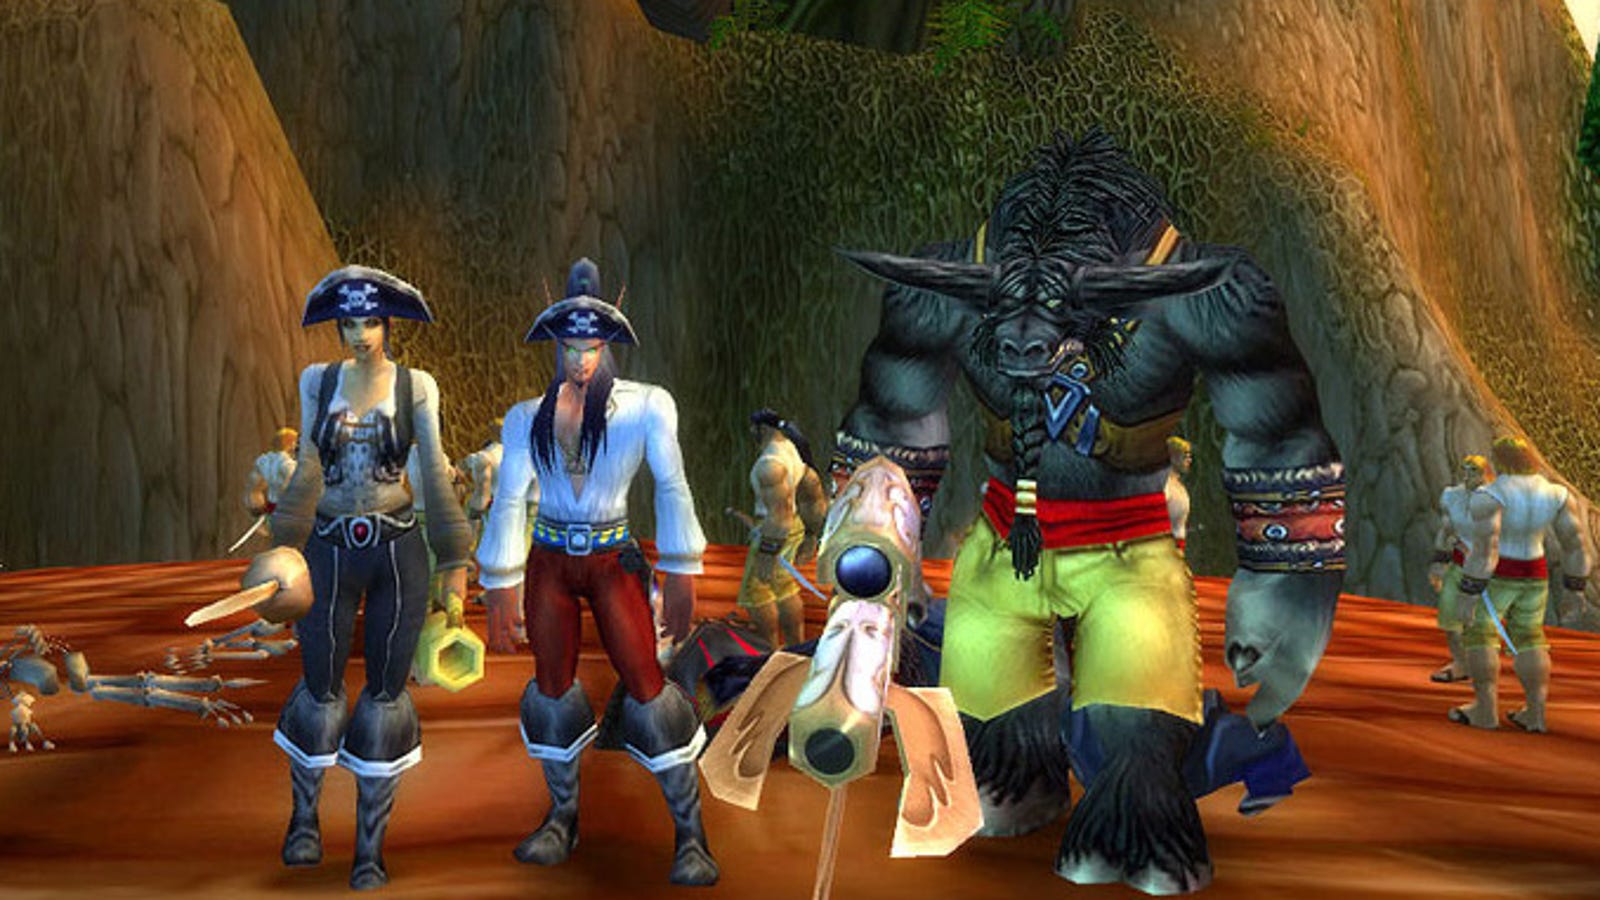 Tomorrow Is Pirate Day In The World Of Warcraft